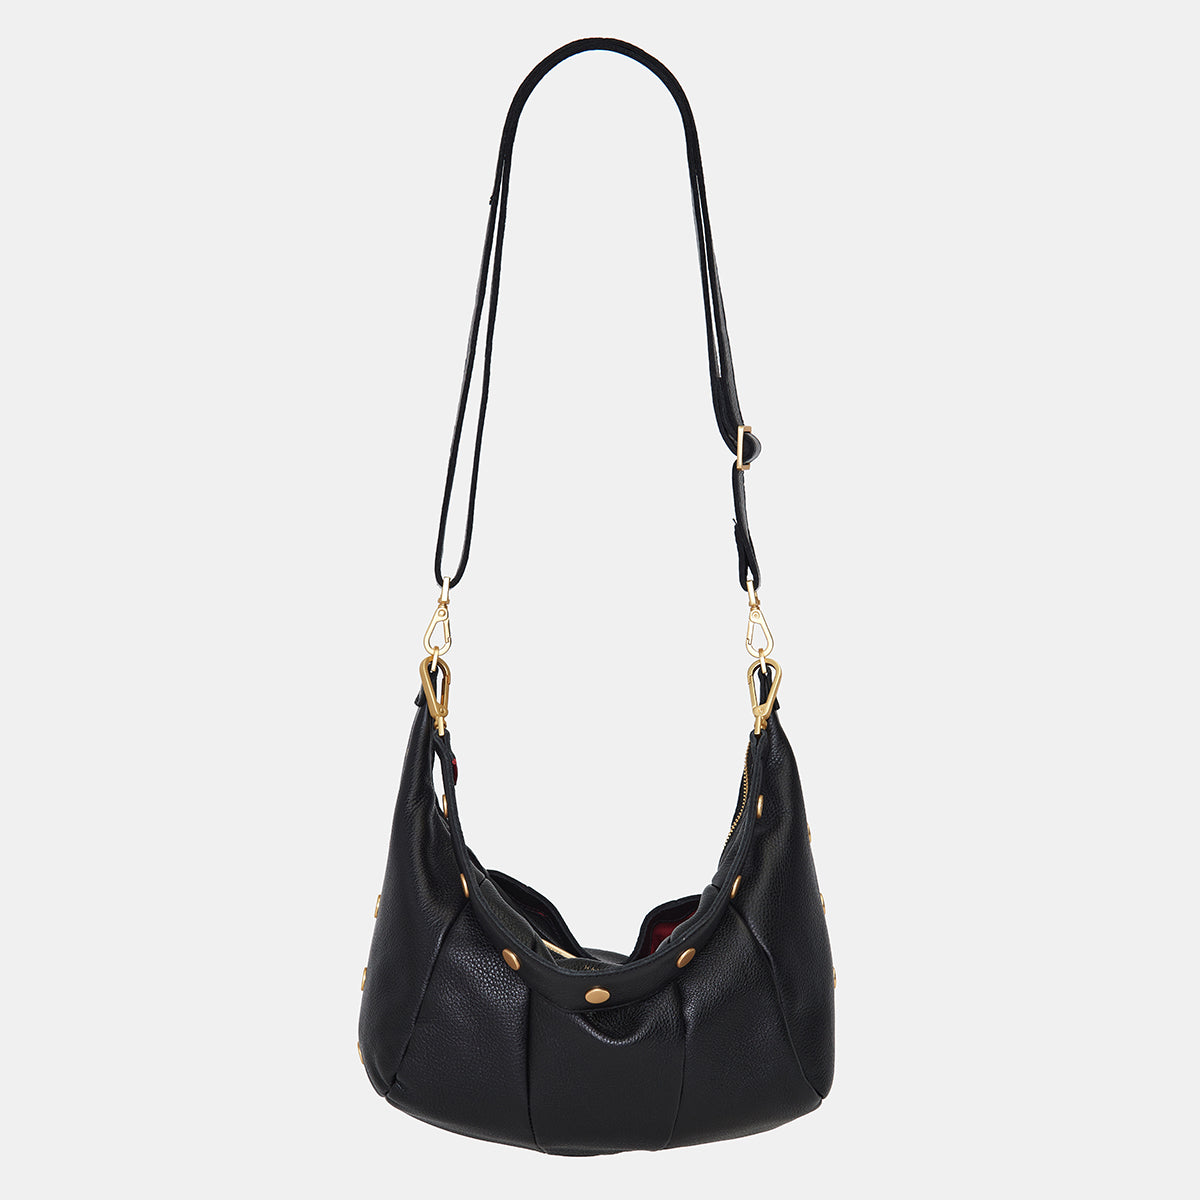 Morgan-Revival Collection Croissant Bag with Slouchy Touch | Hammitt ...